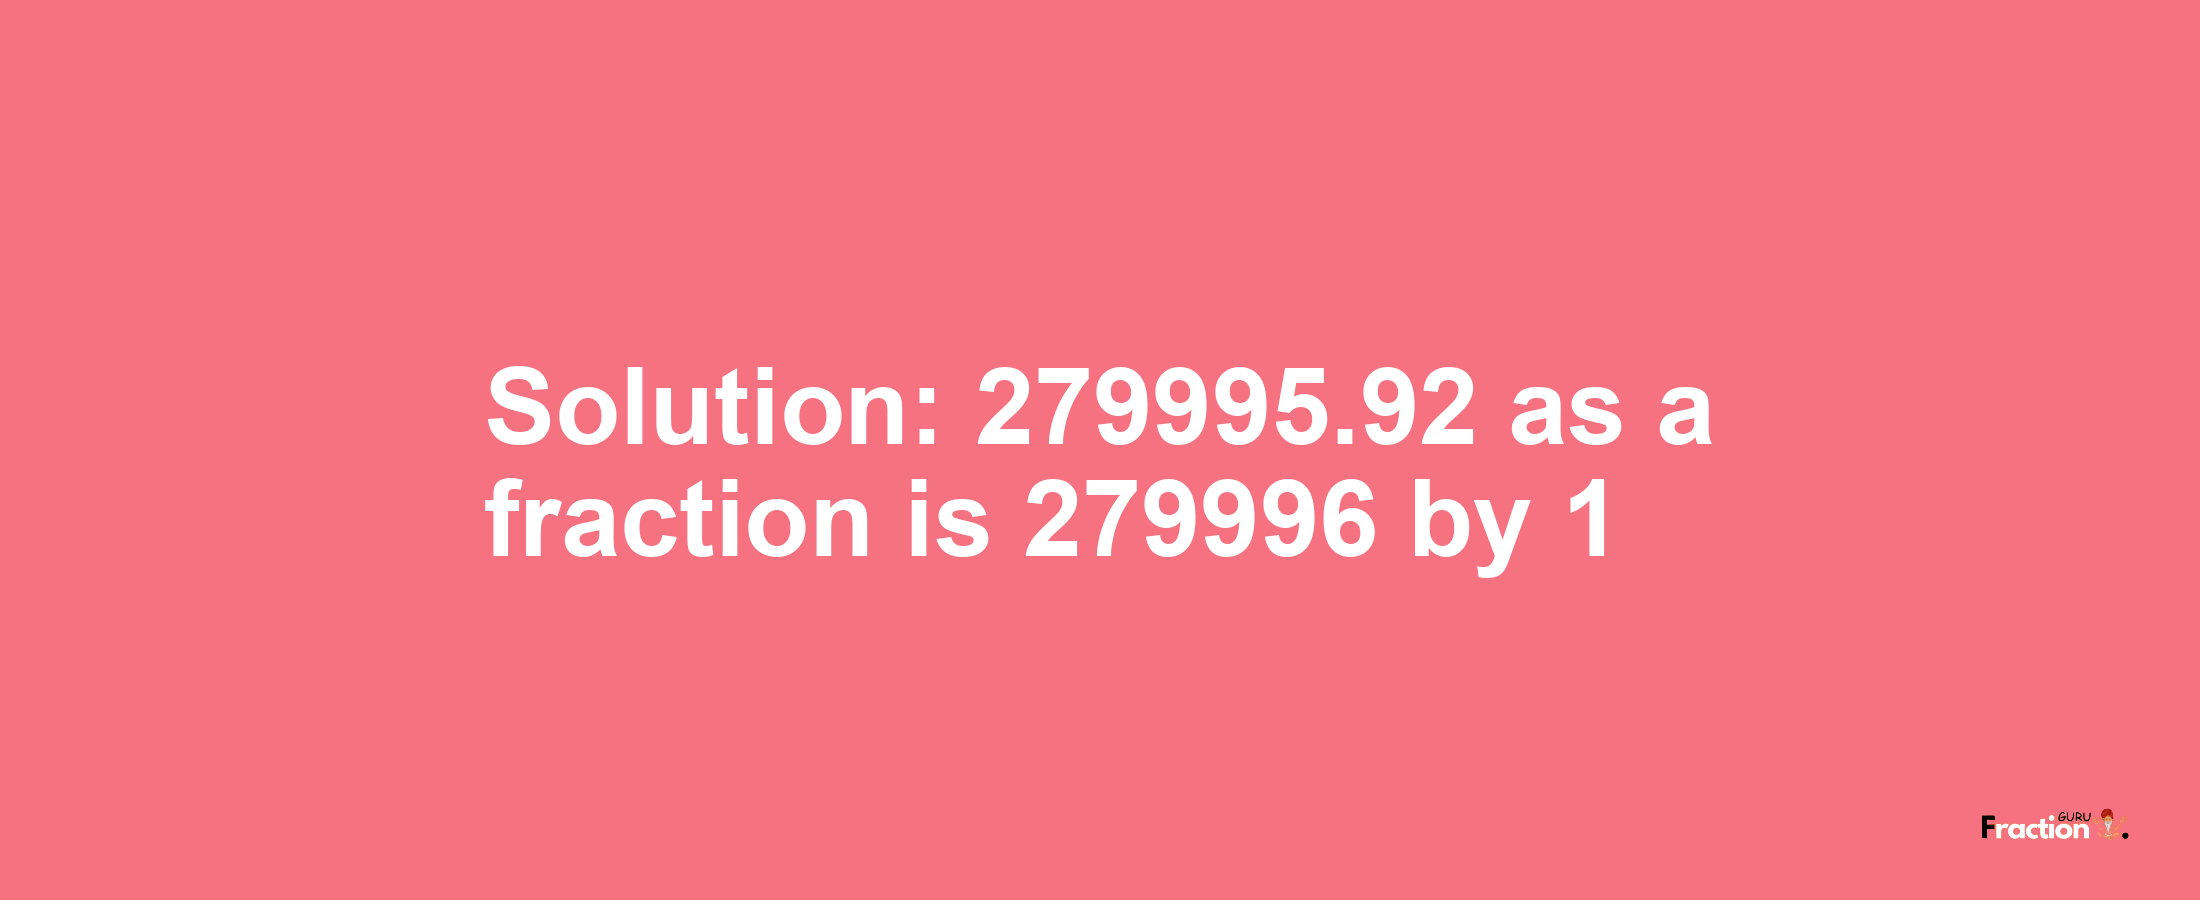 Solution:279995.92 as a fraction is 279996/1